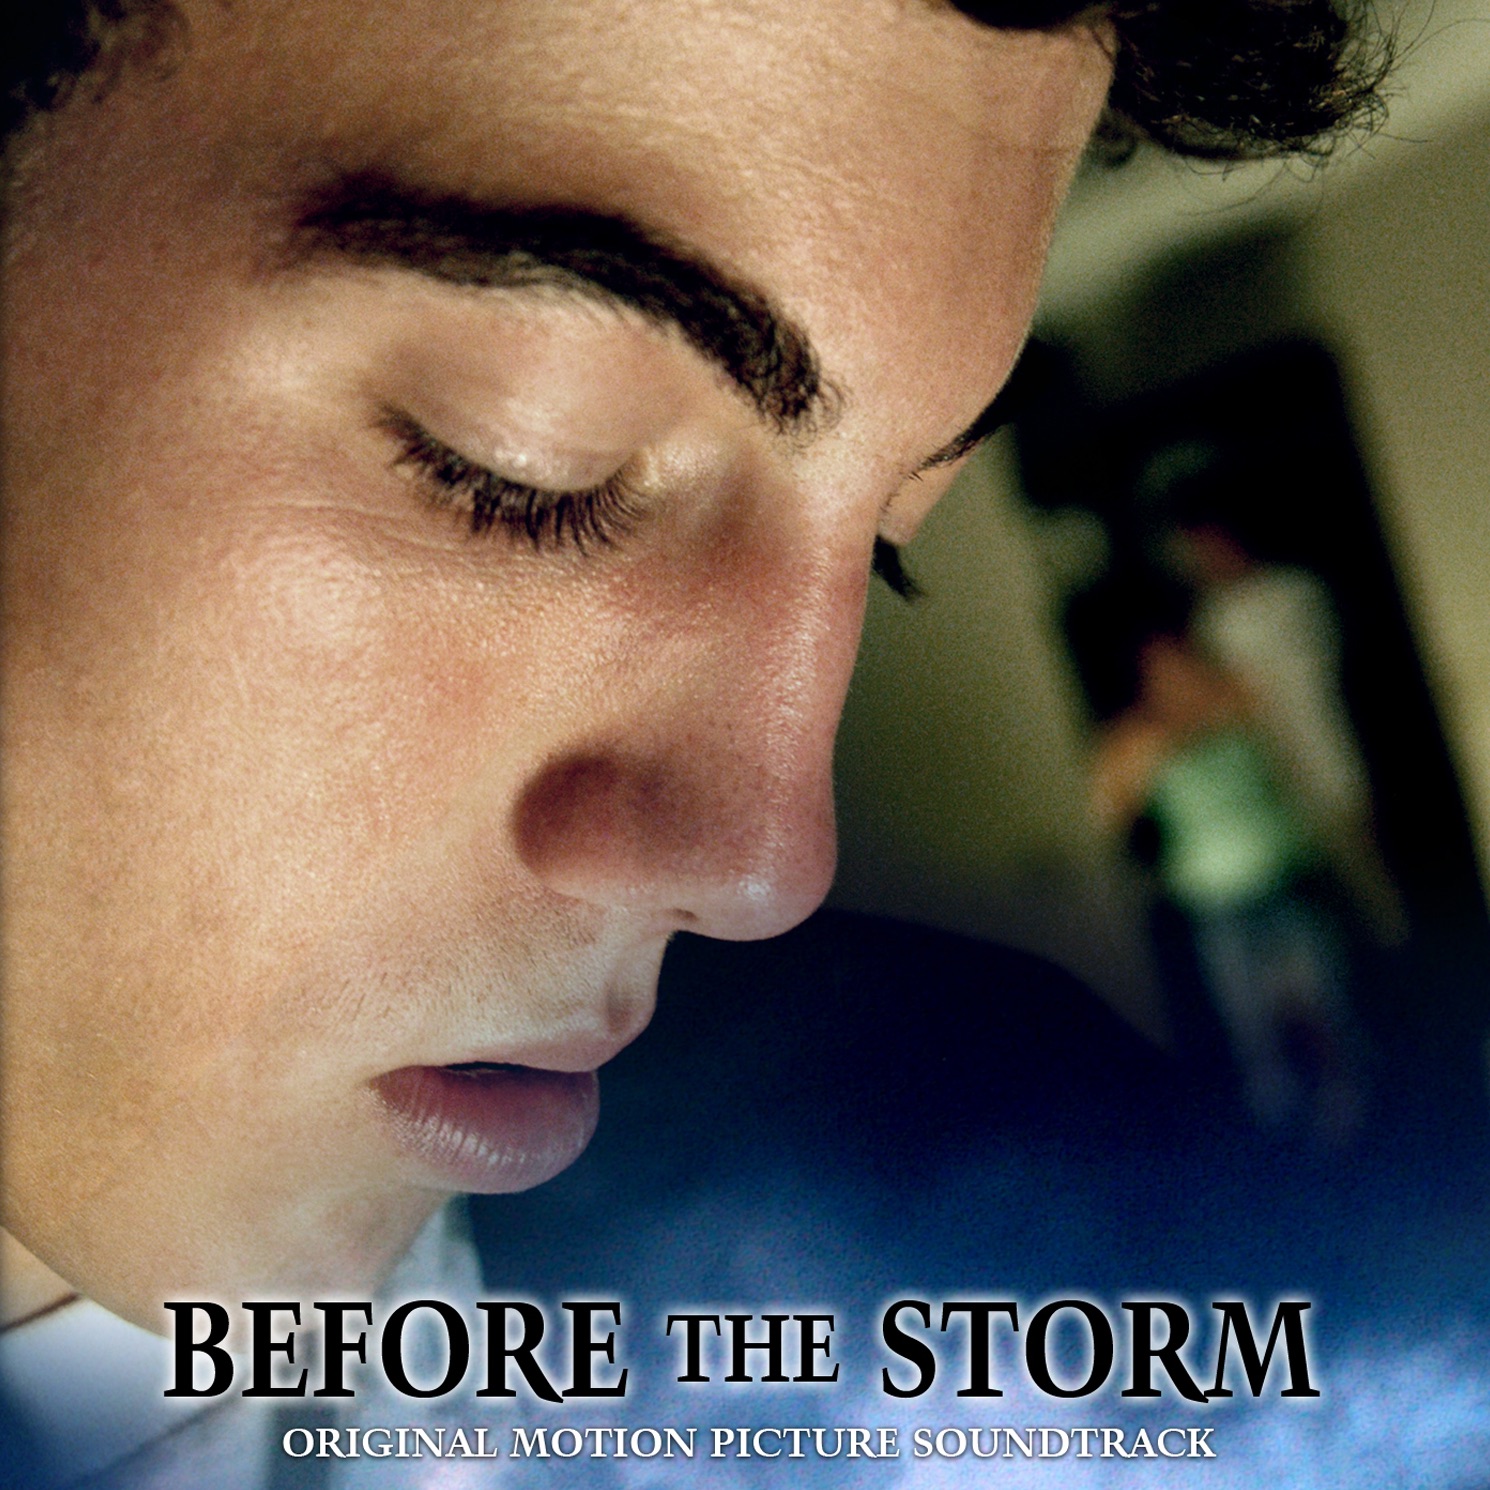 Before the Storm (Original Motion Picture Soundtrack) by Zach Neff on iTunes - 1490x1490sr